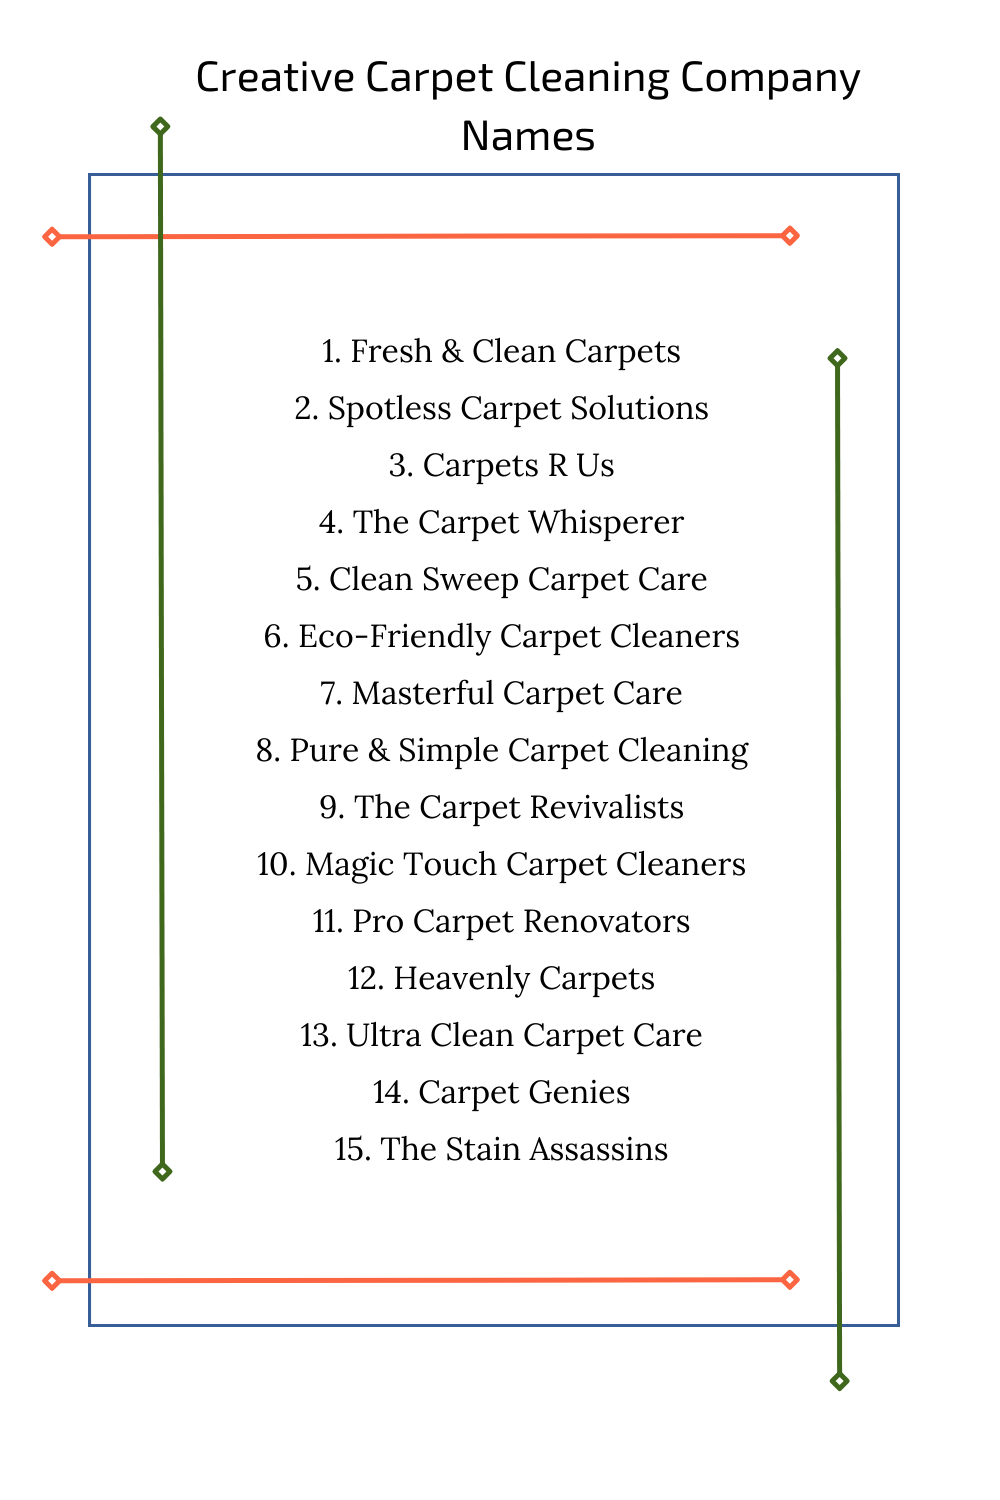 Creative Carpet Cleaning Company Names